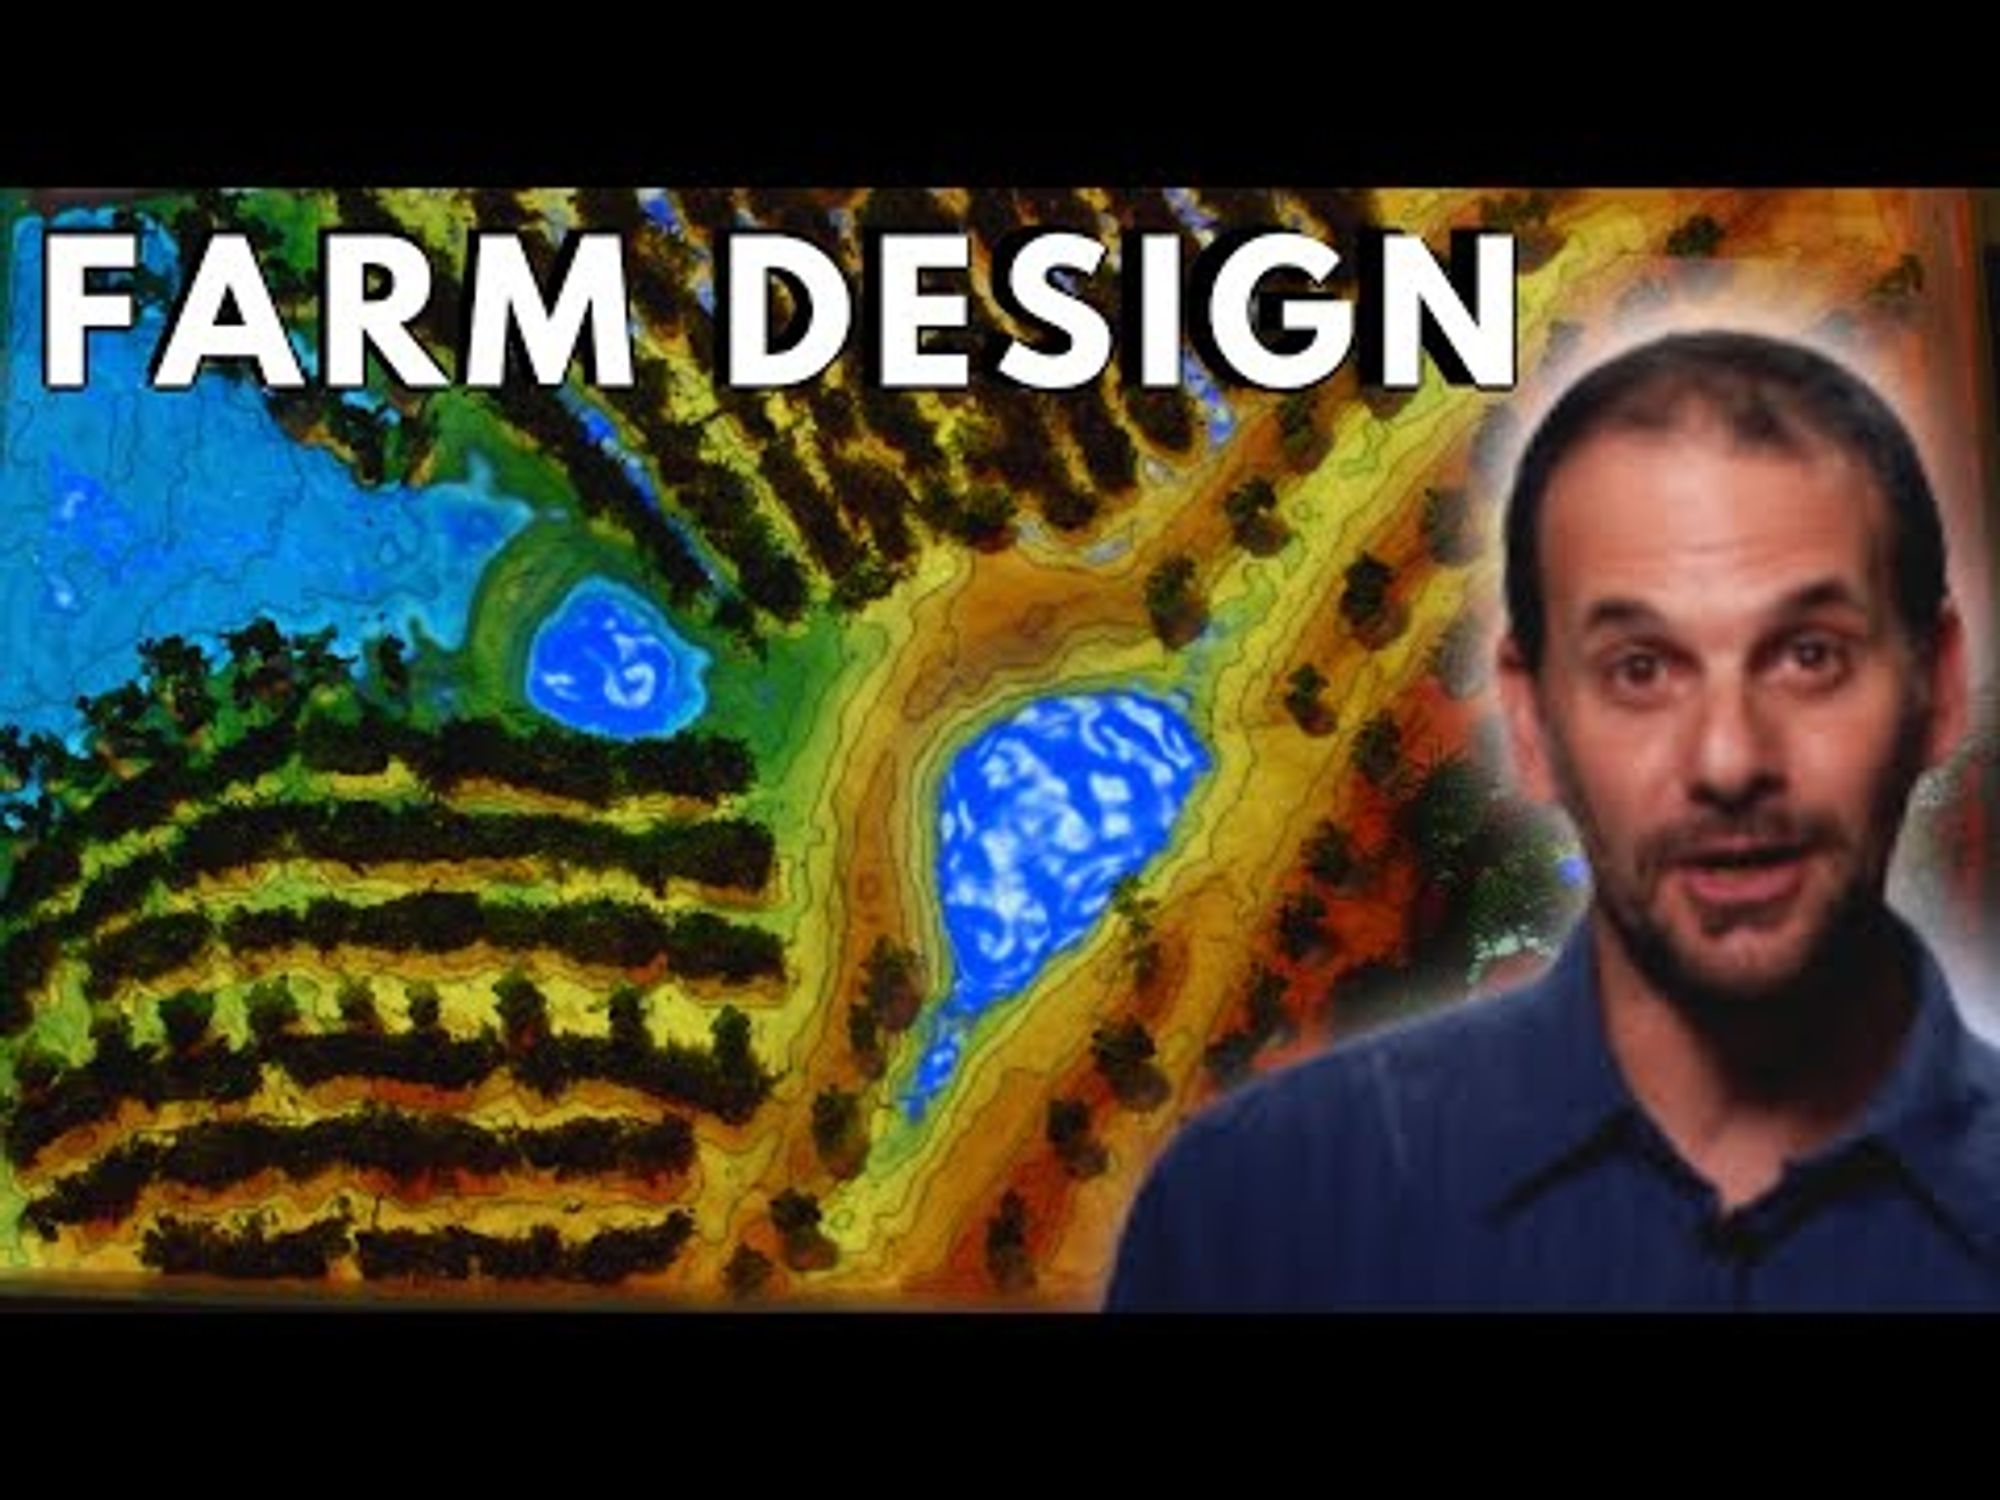 This Farm Design Can HEAL the PLANET